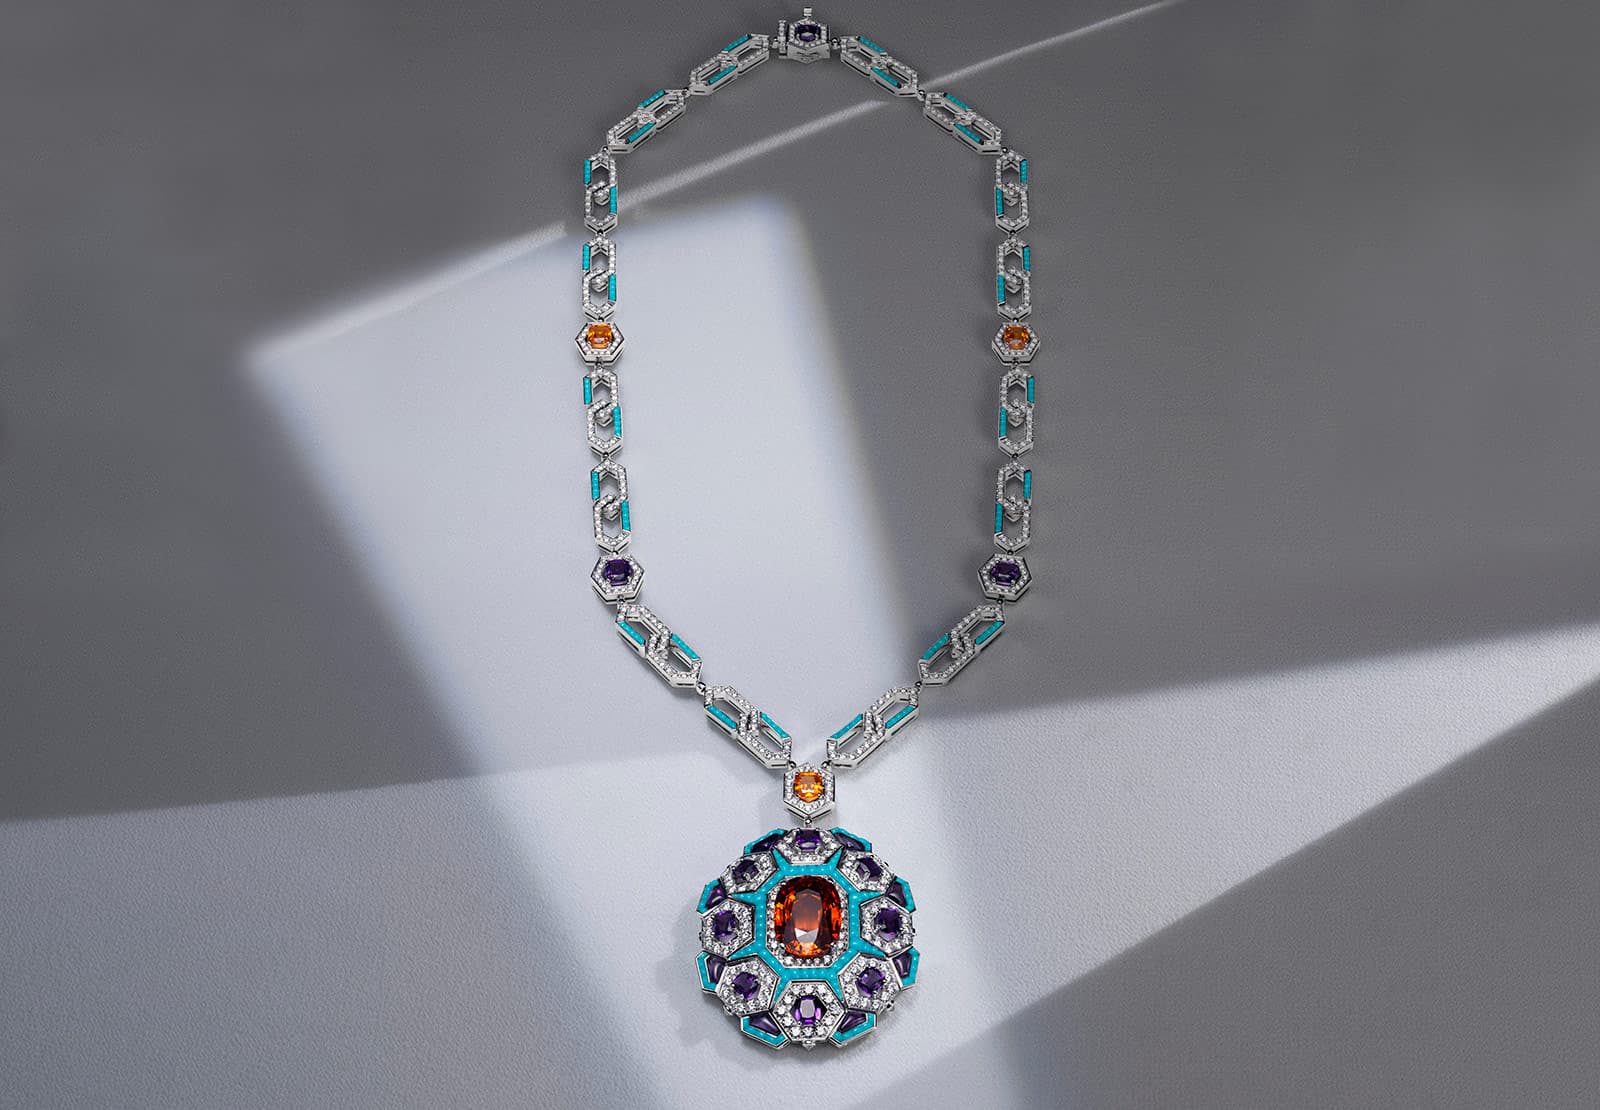 Bulgari 'Cinemagia' collection ‘Night at the Casino’ medallion necklace with 16.85ct Mandarin garnet, turquoise, amethysts and diamonds